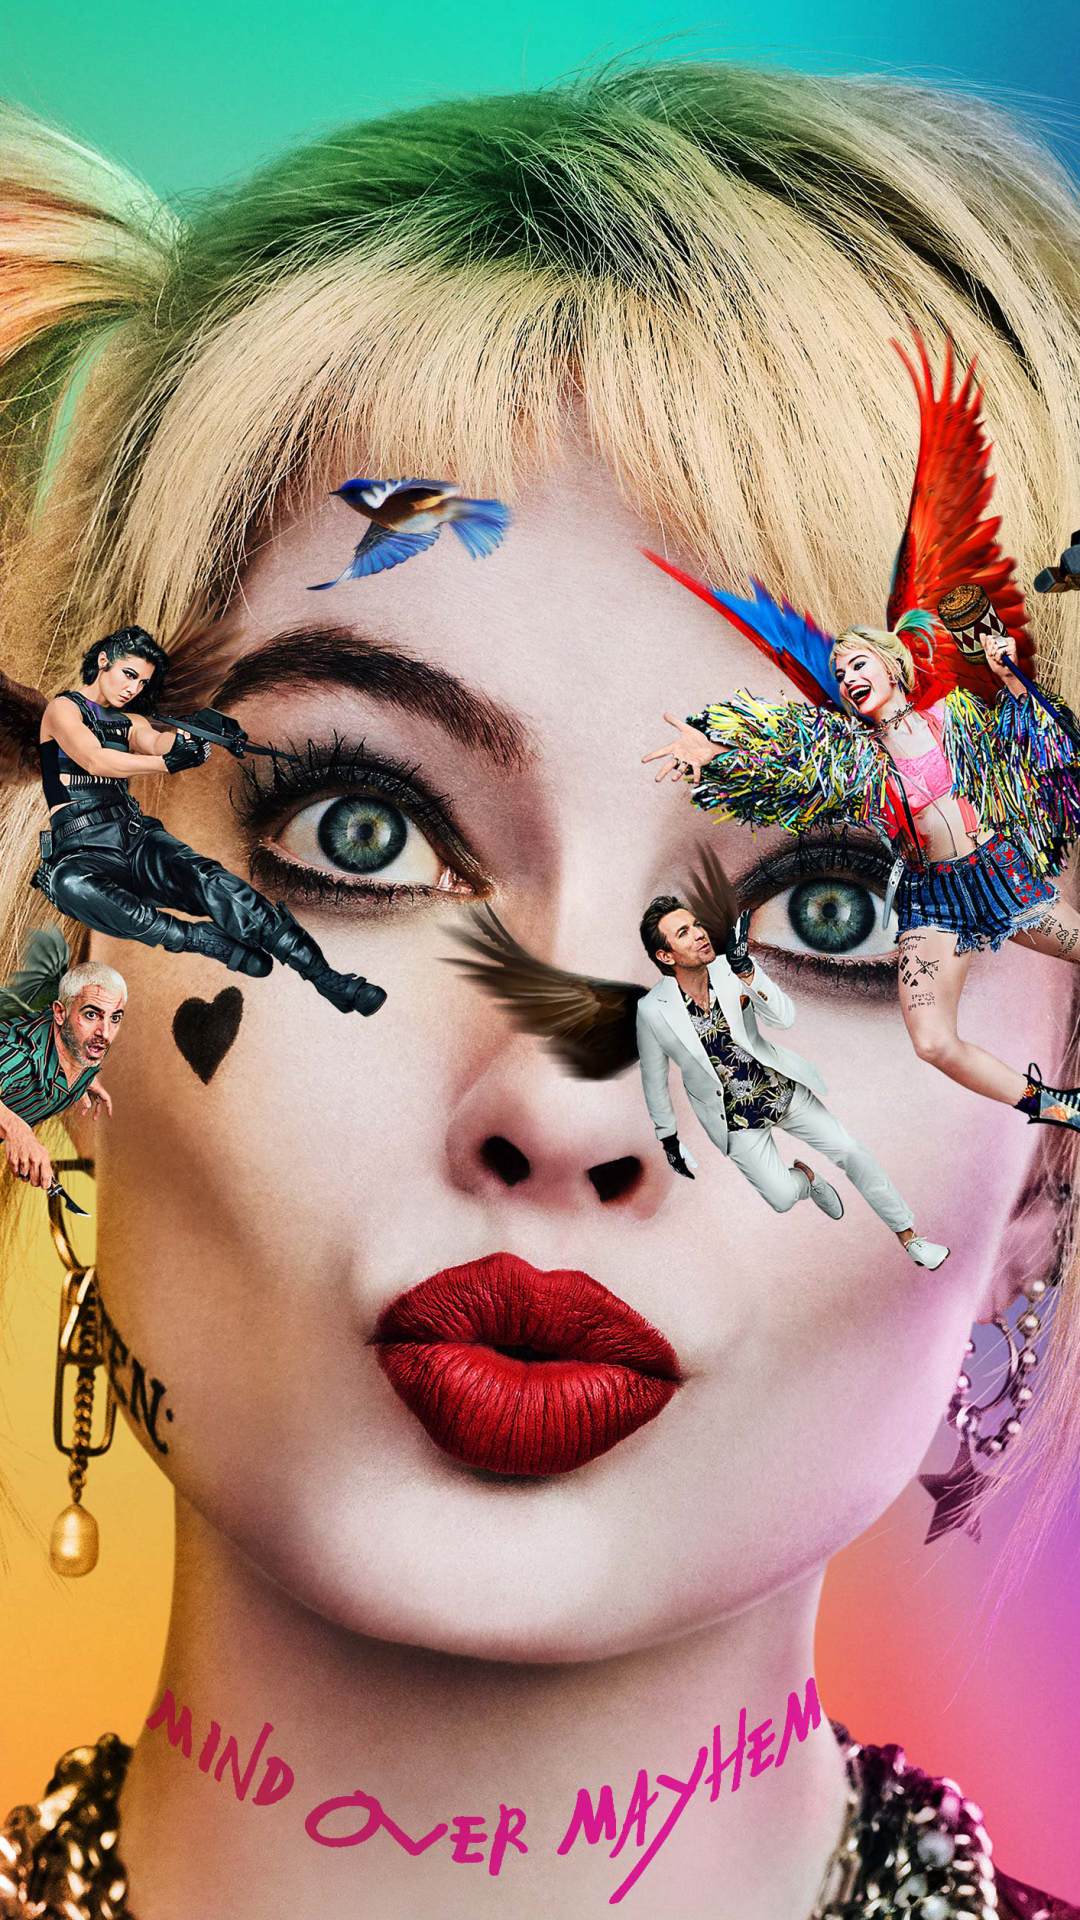 Birds of Prey (and the Fantabulous Emancipation of One Harley Quinn) Phone Wallpaper